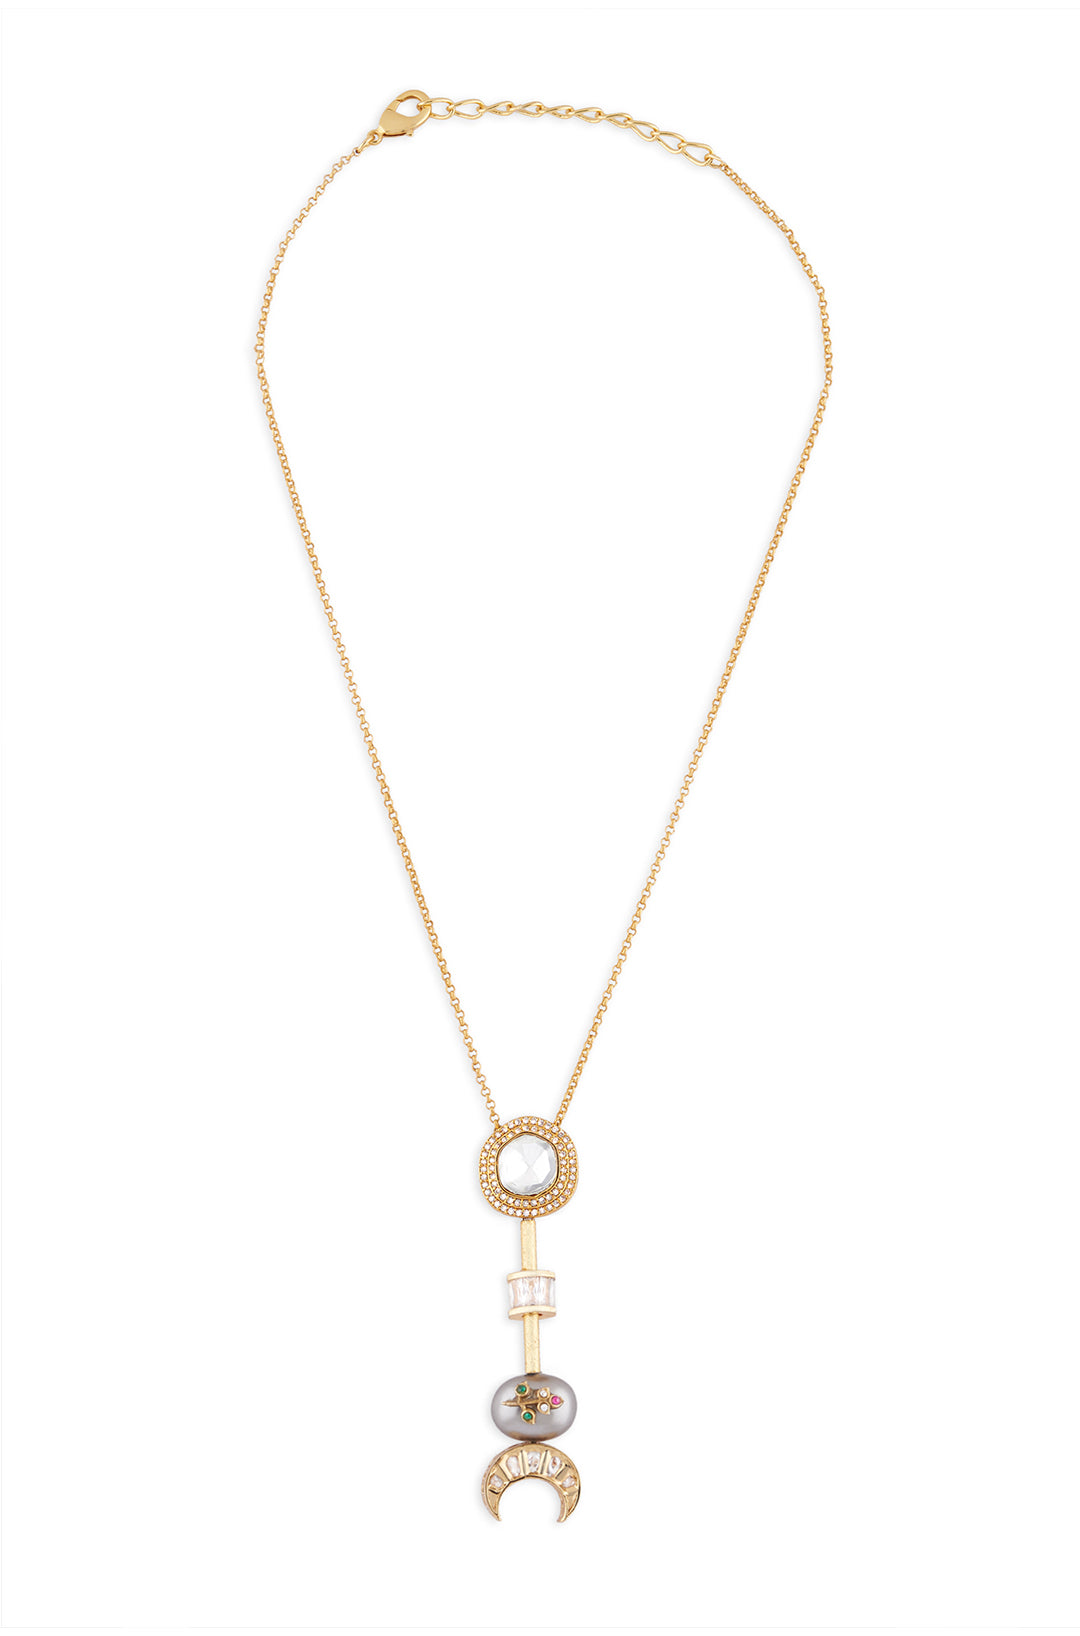 Load image into Gallery viewer, Gold Tone Polki Long Necklace - Joules by Radhika
